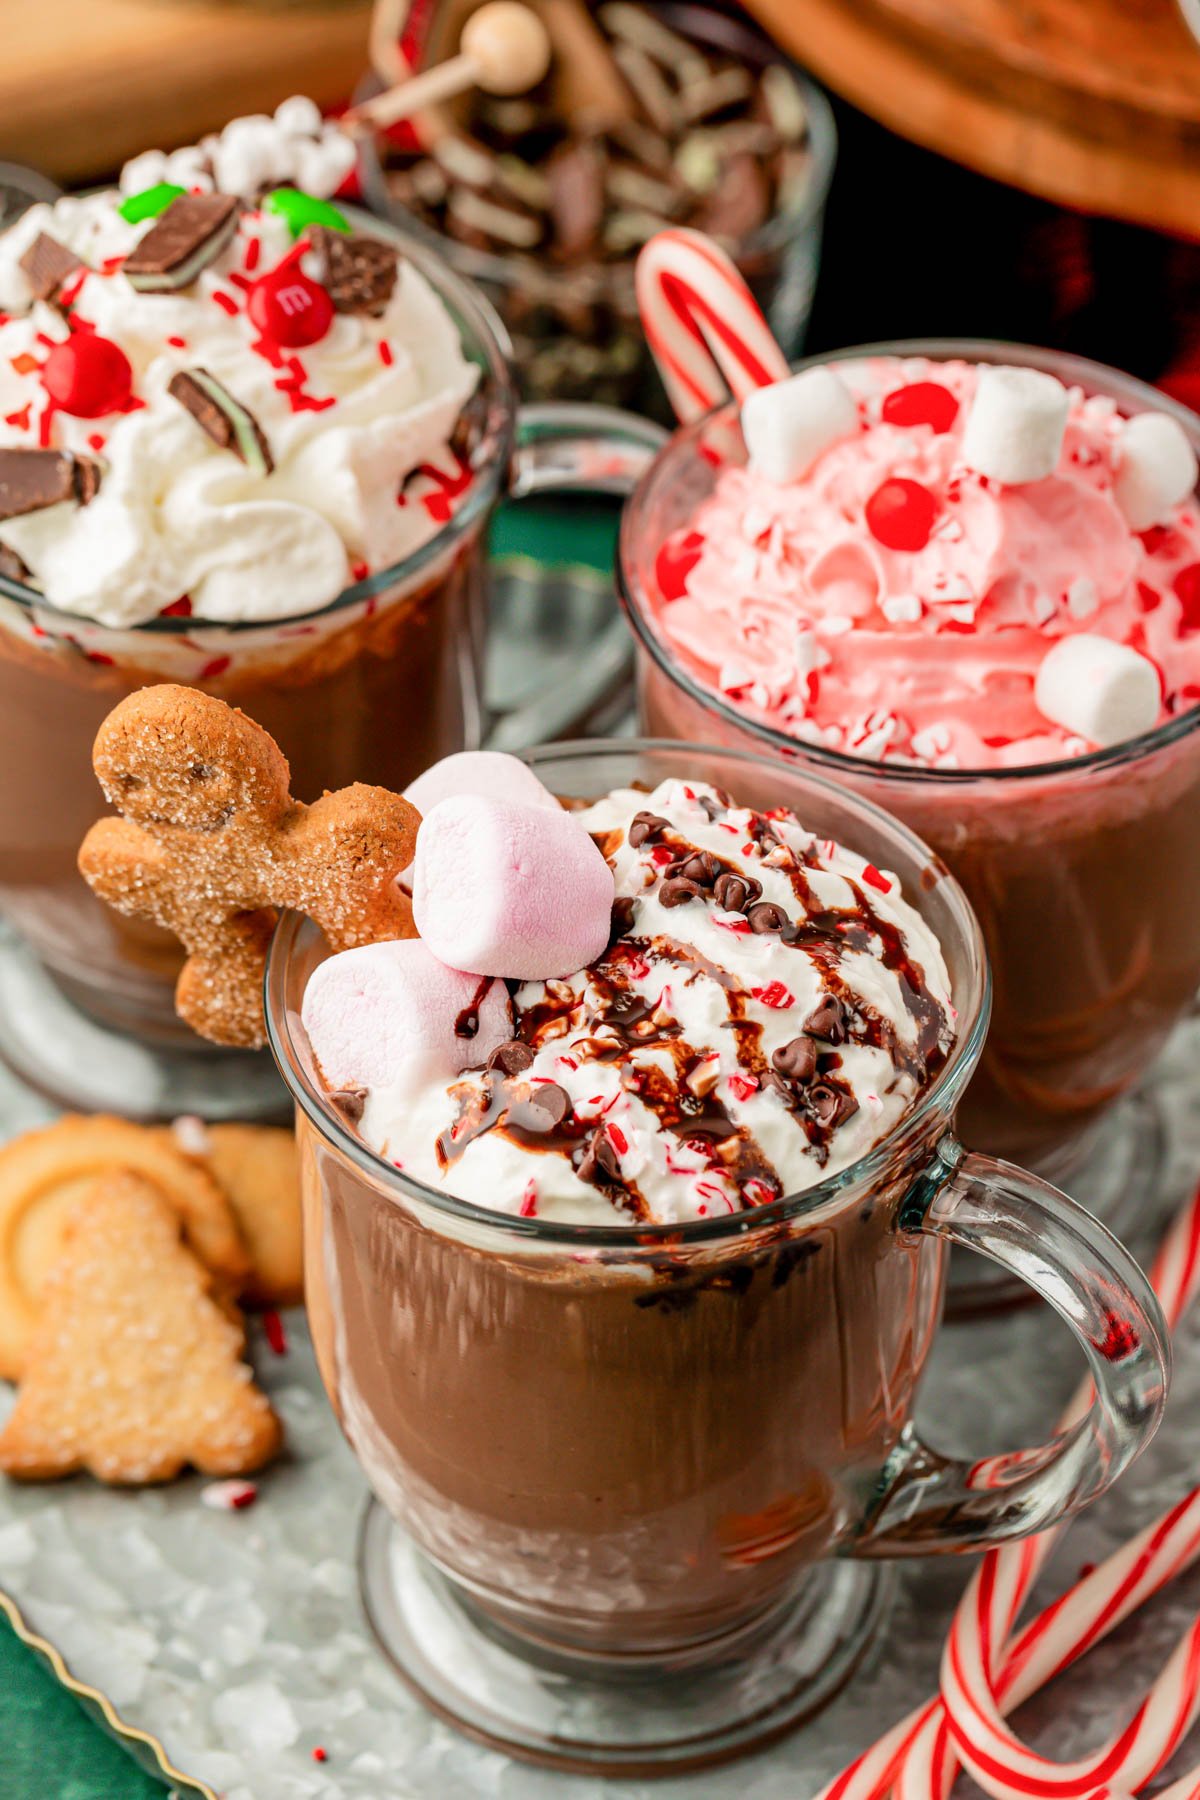 Three glass mugs of hot chocolate on a table.